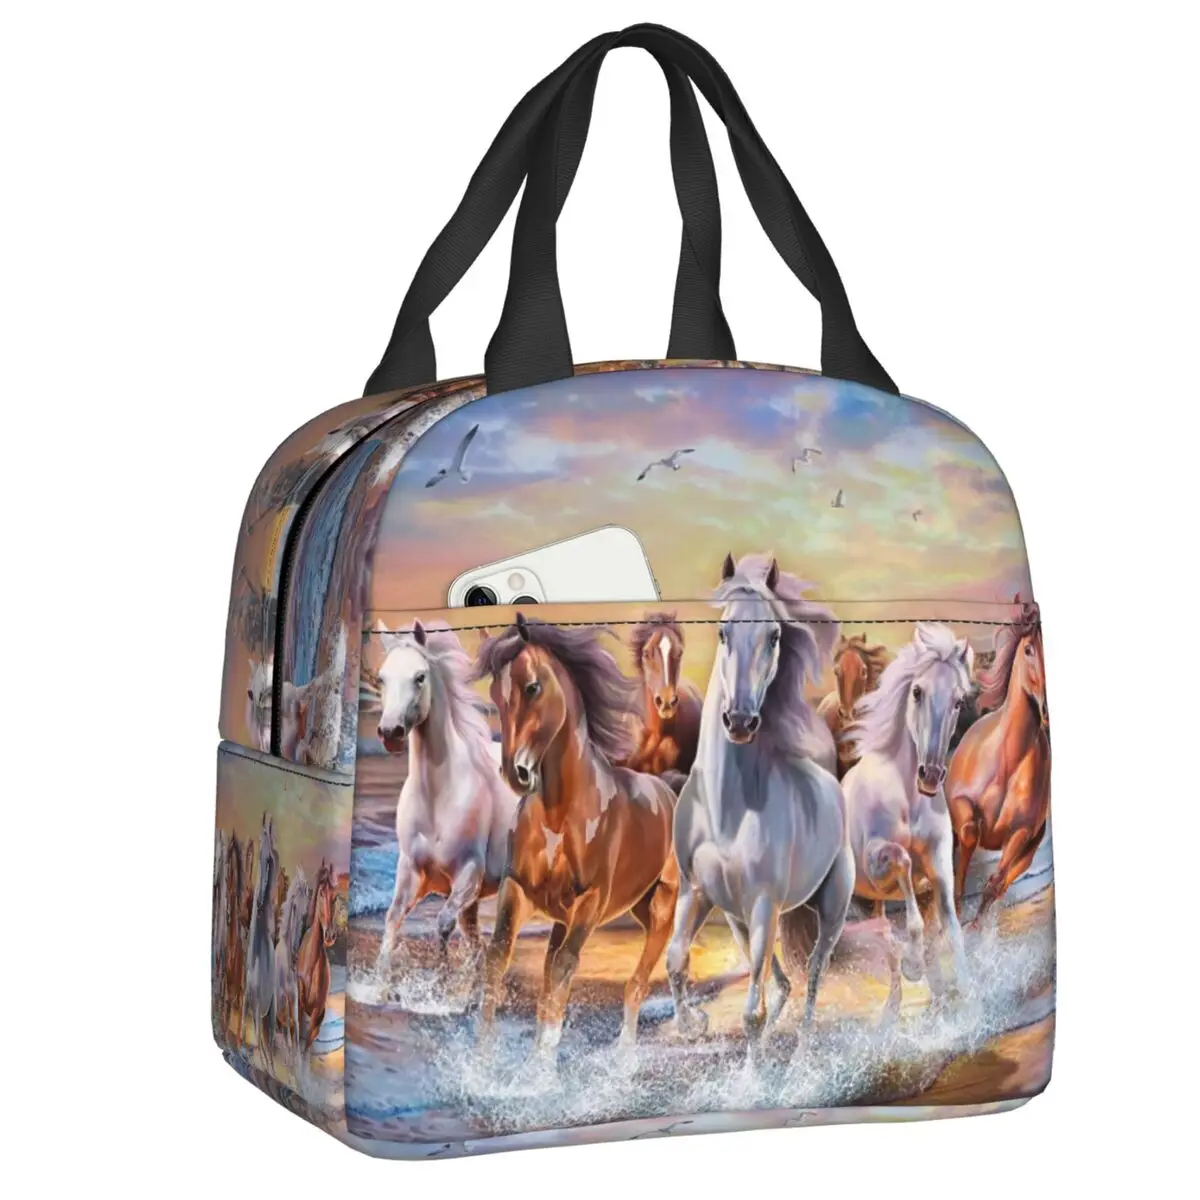 Custom Classic Horse Running Painting Lunch Bag Men Women Warm Cooler Insulated Lunch Box for Kids School